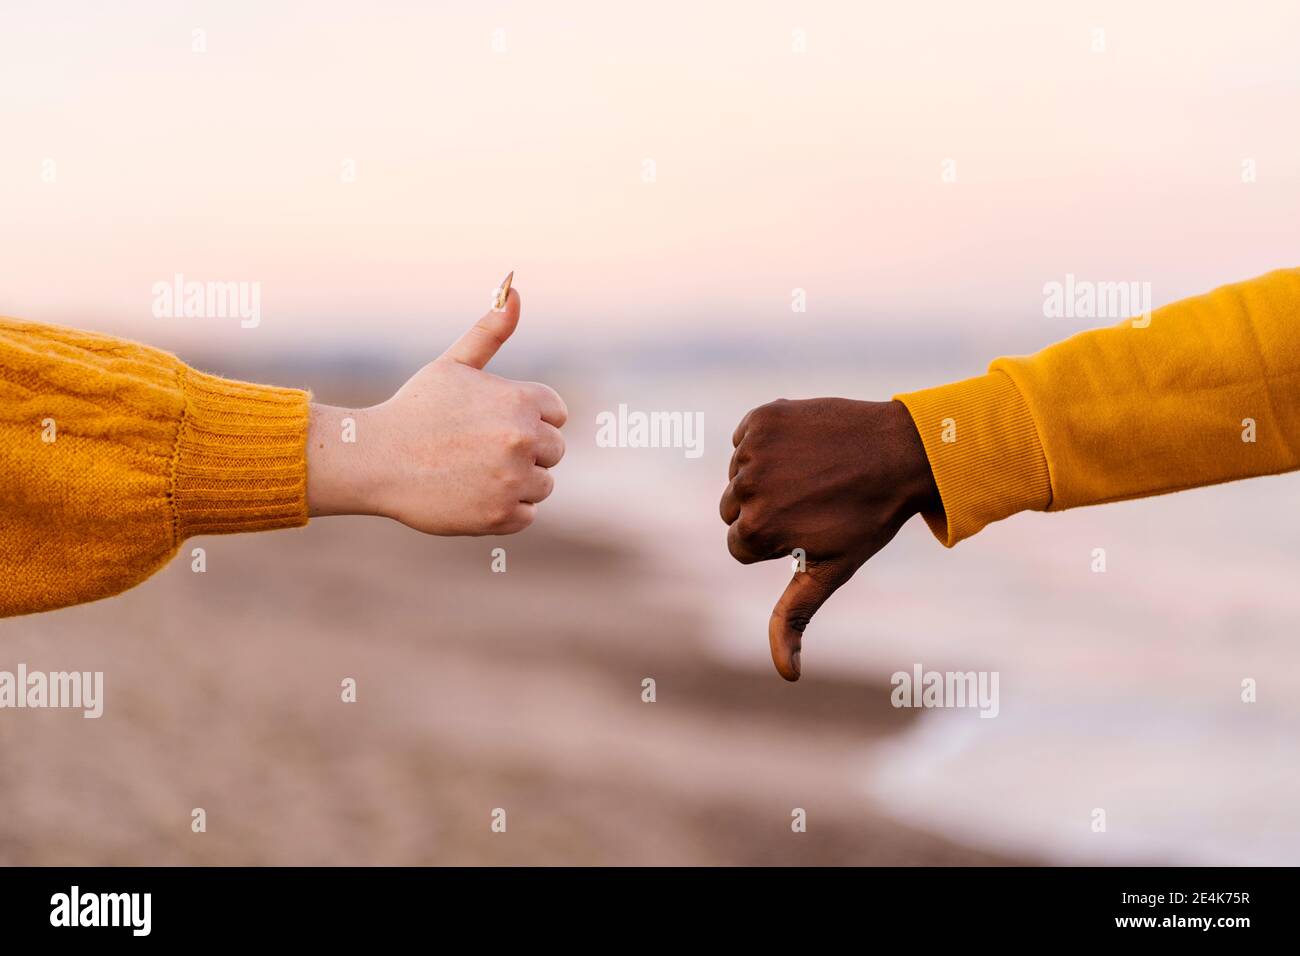 Woman and man showing thumps up and down gesture at beach Stock Photo